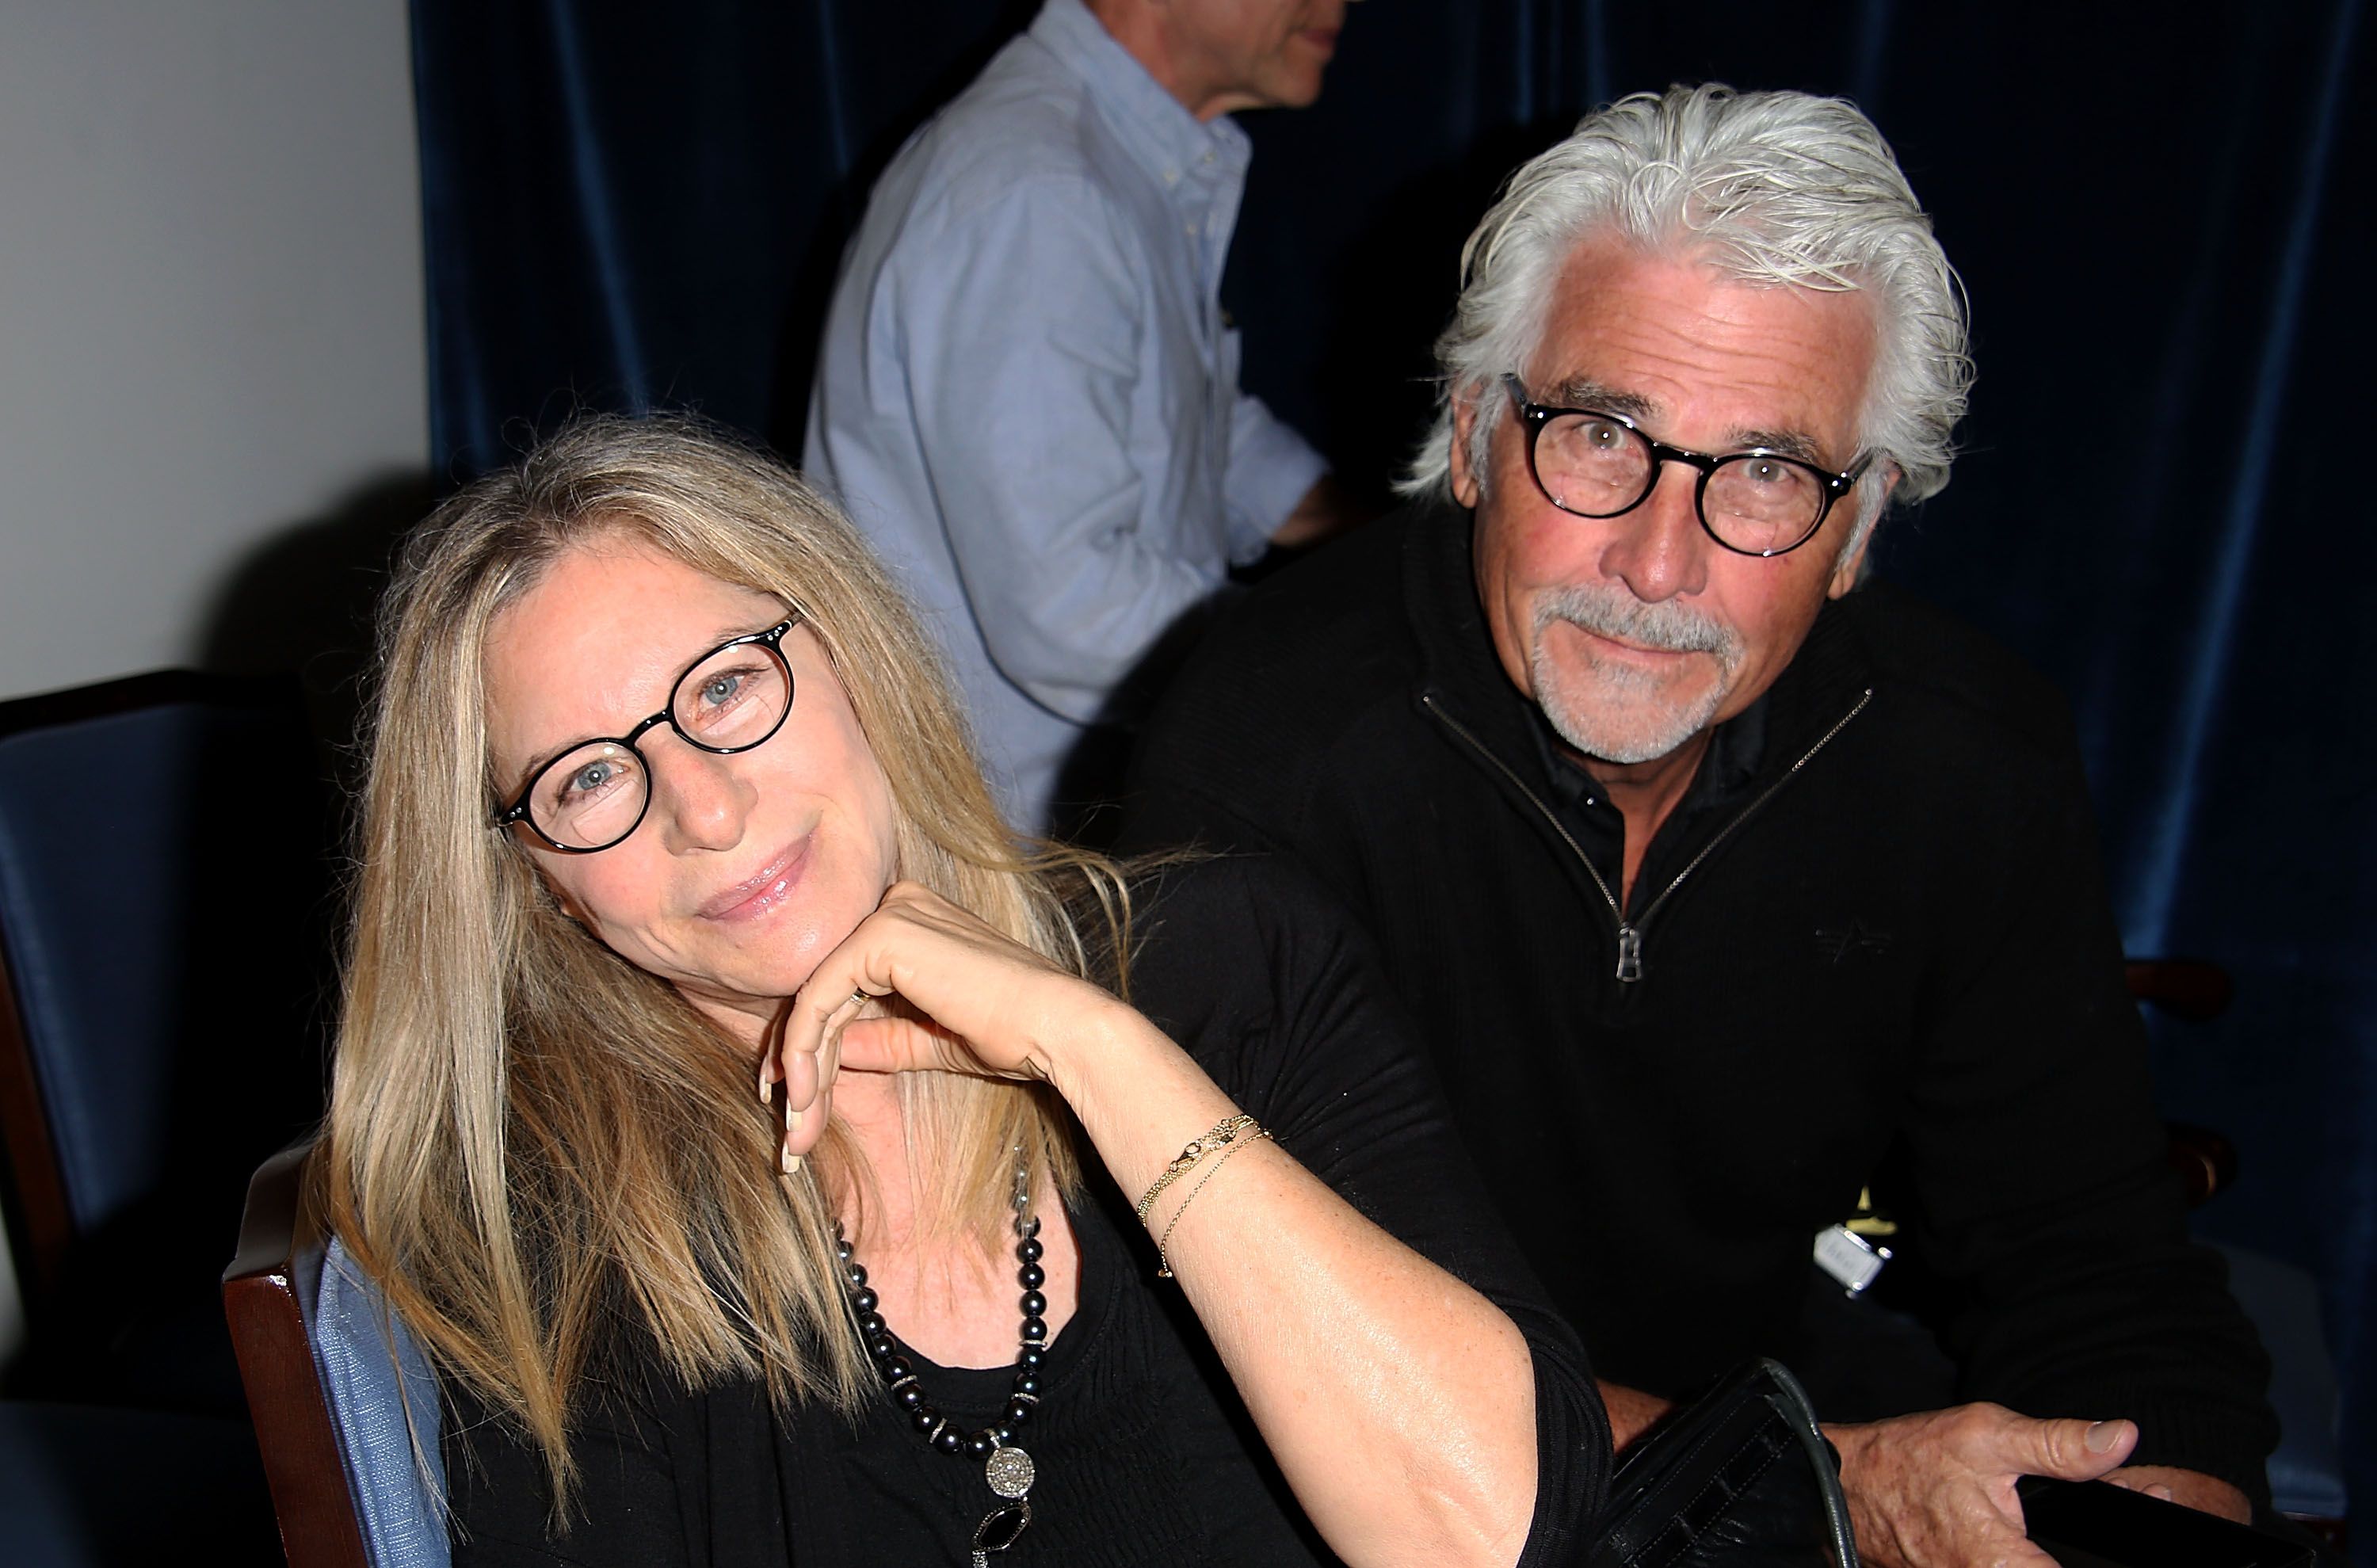 Barbra Streisand and James Brolin attend the "And So It Goes" premiere at Guild Hall on July 6, 2014 in East Hampton, New York. | Source: Getty Images